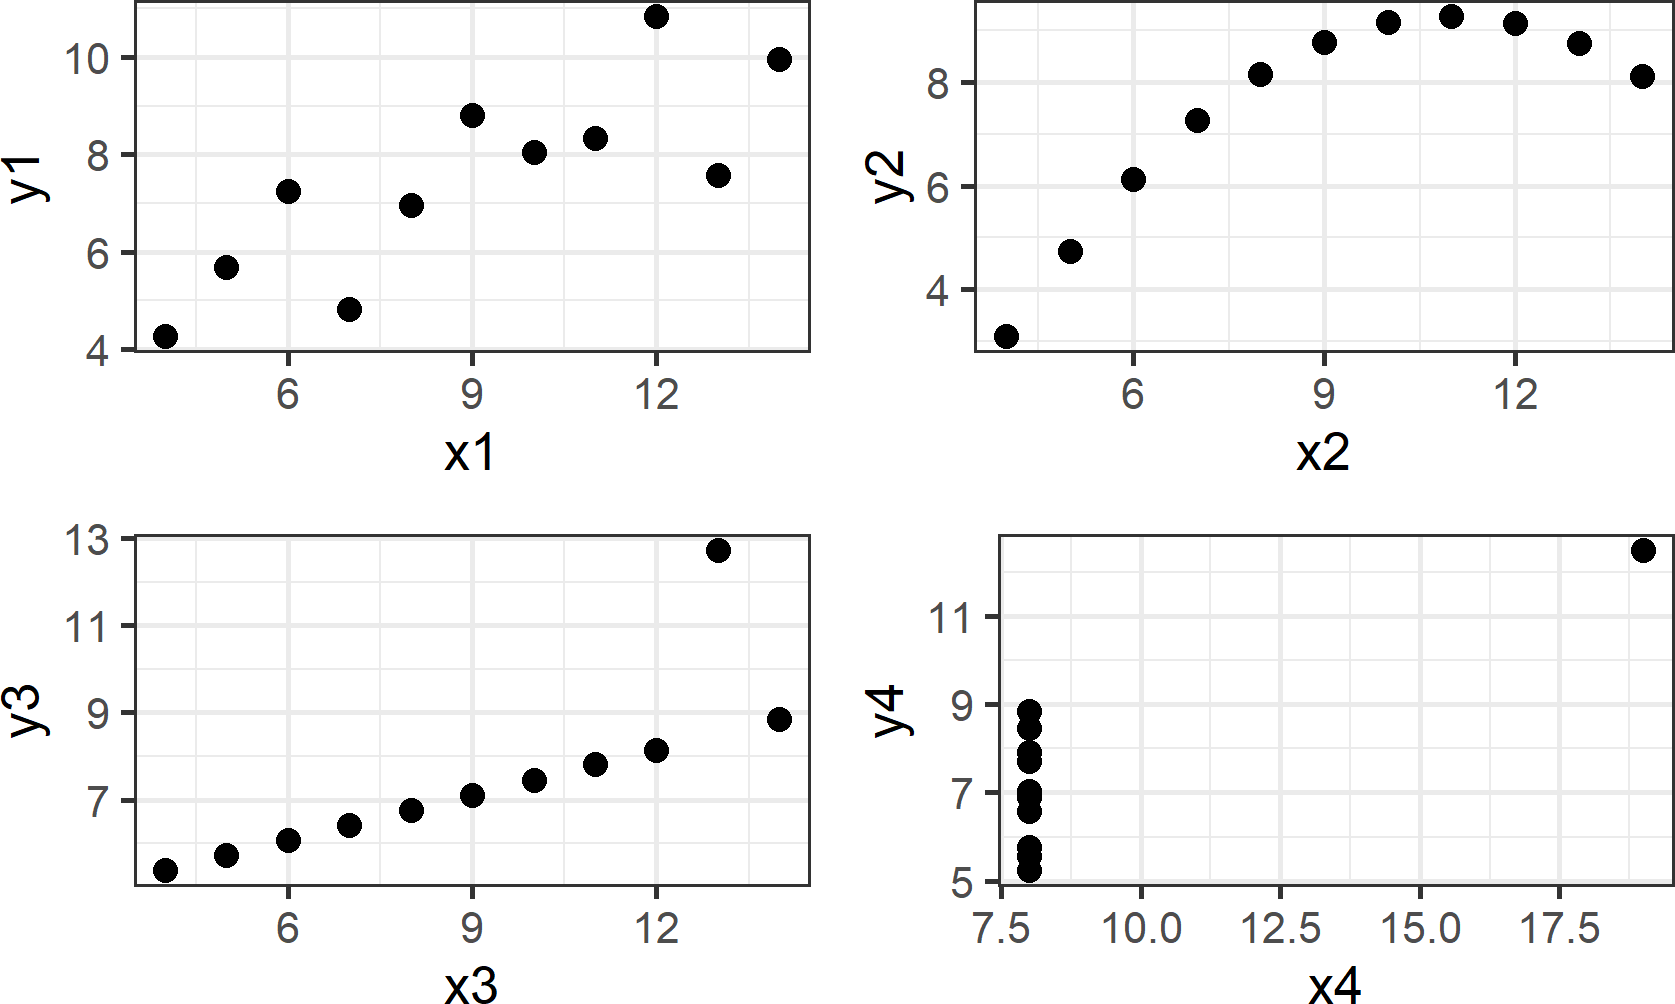 This visual depiction of Ansombe's quartet yields much more insight than simply viewing the data in tabular form or relying on output of a linear regression.